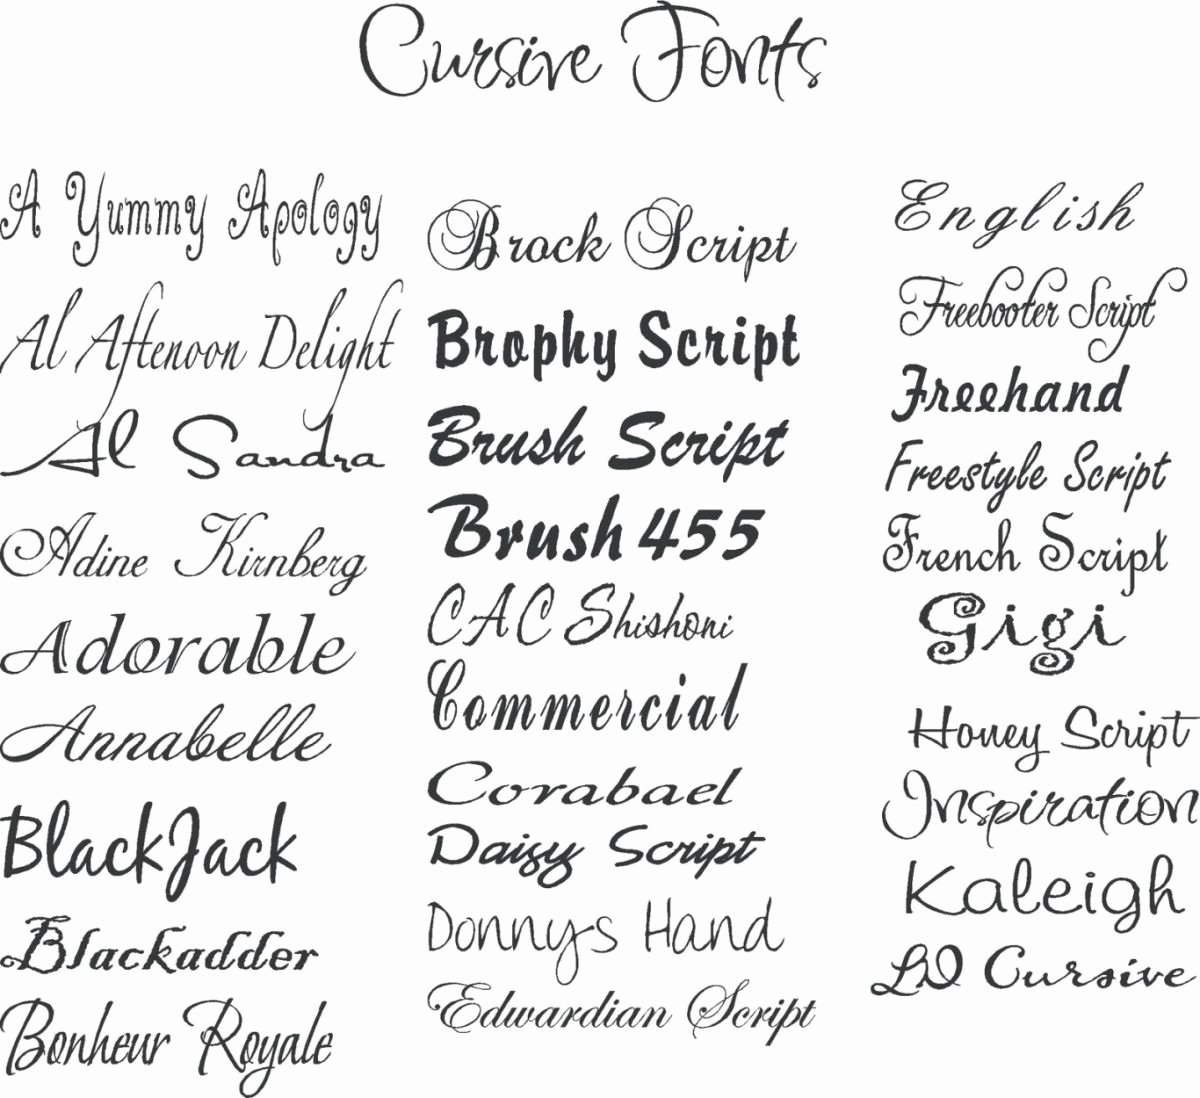 Script Fonts for Tattoos New Tattoo Fonts for Men and Women